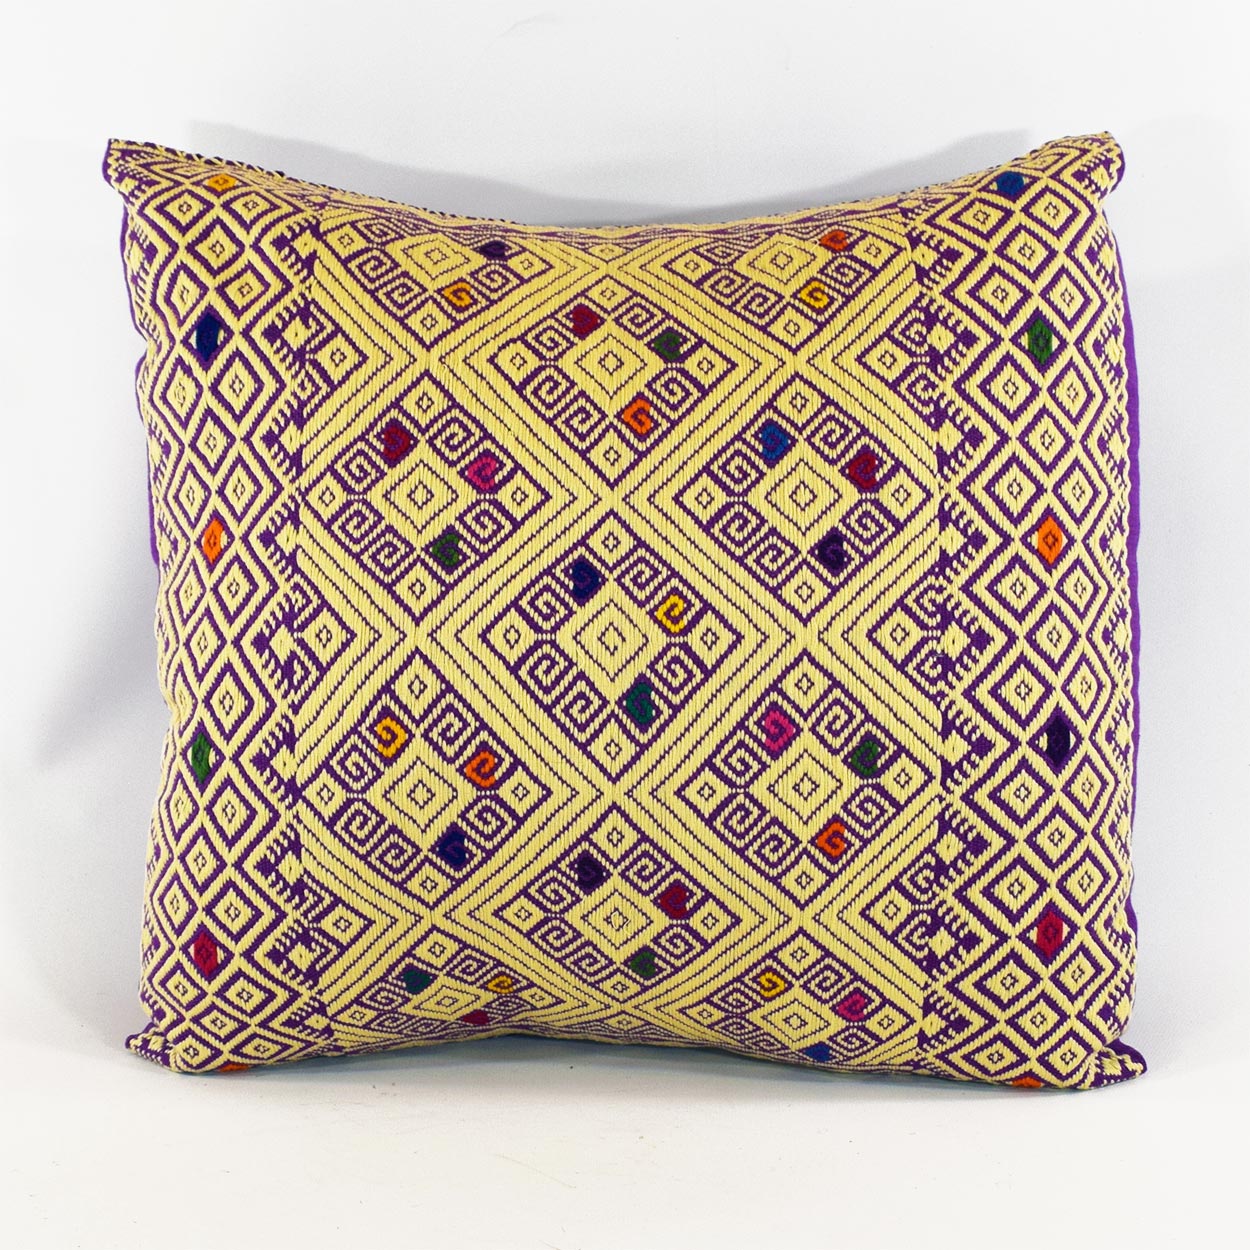 131208-98 - 15in Stitched Chiapas Pillow 131208-98